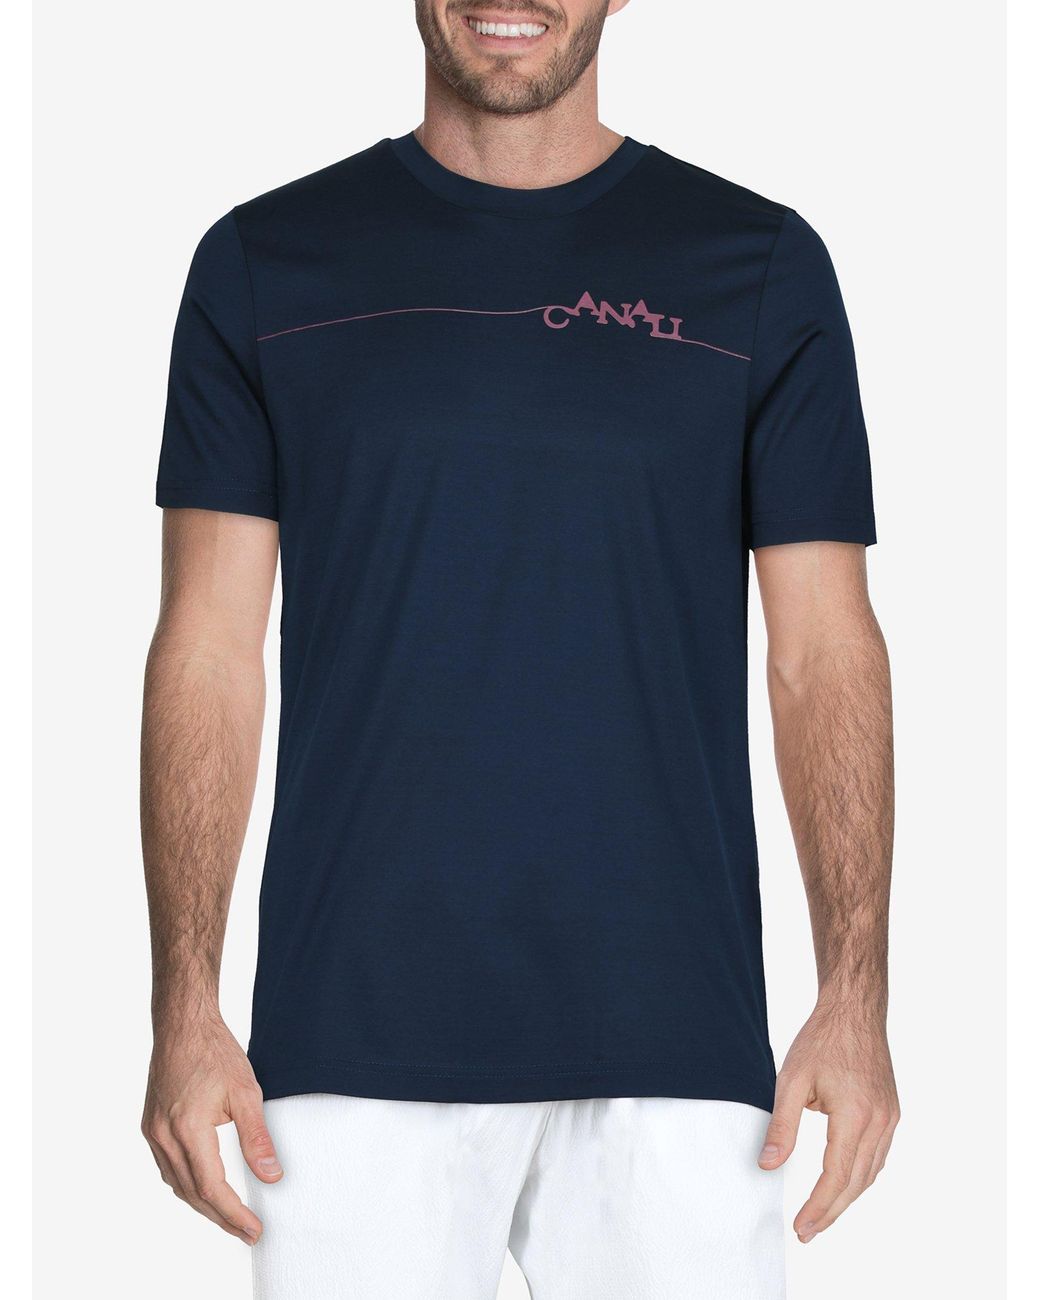 Canali Cotton Jersey Crew-neck T-shirt It 48 in Blue for Men - Lyst